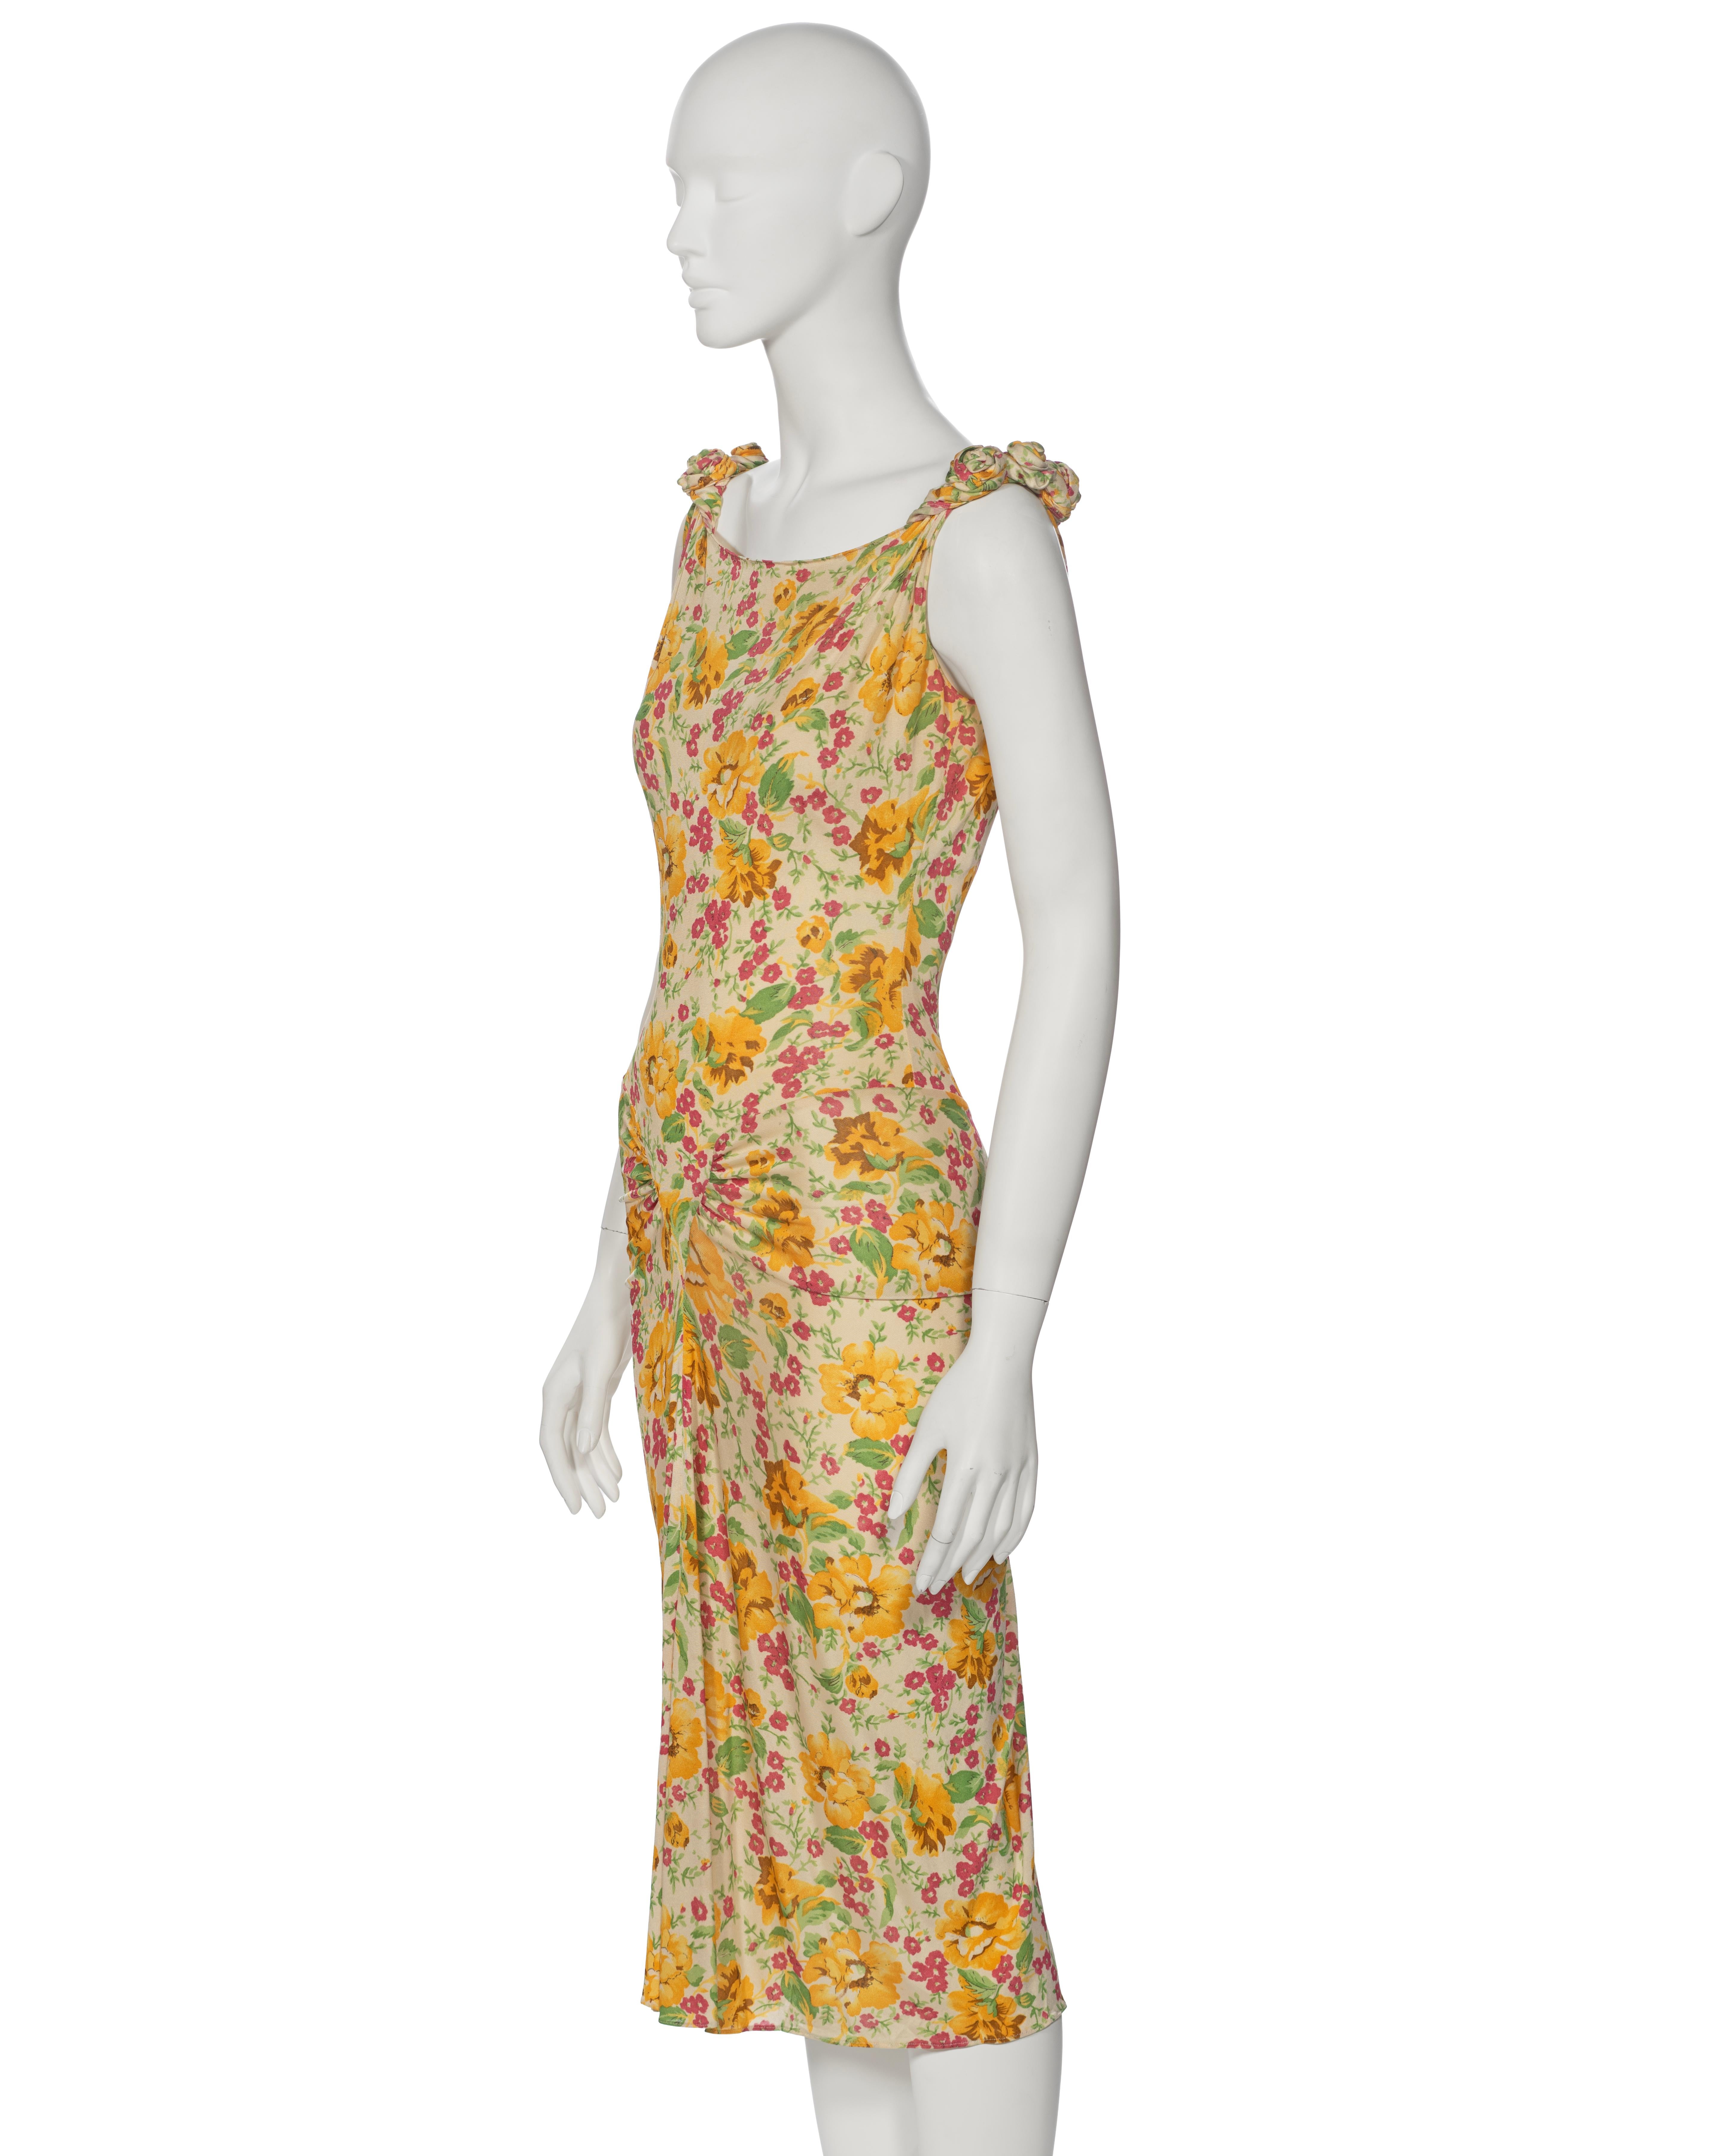 Christian Dior by John Galliano Floral Silk Jersey Cocktail Dress, ss 2000 9